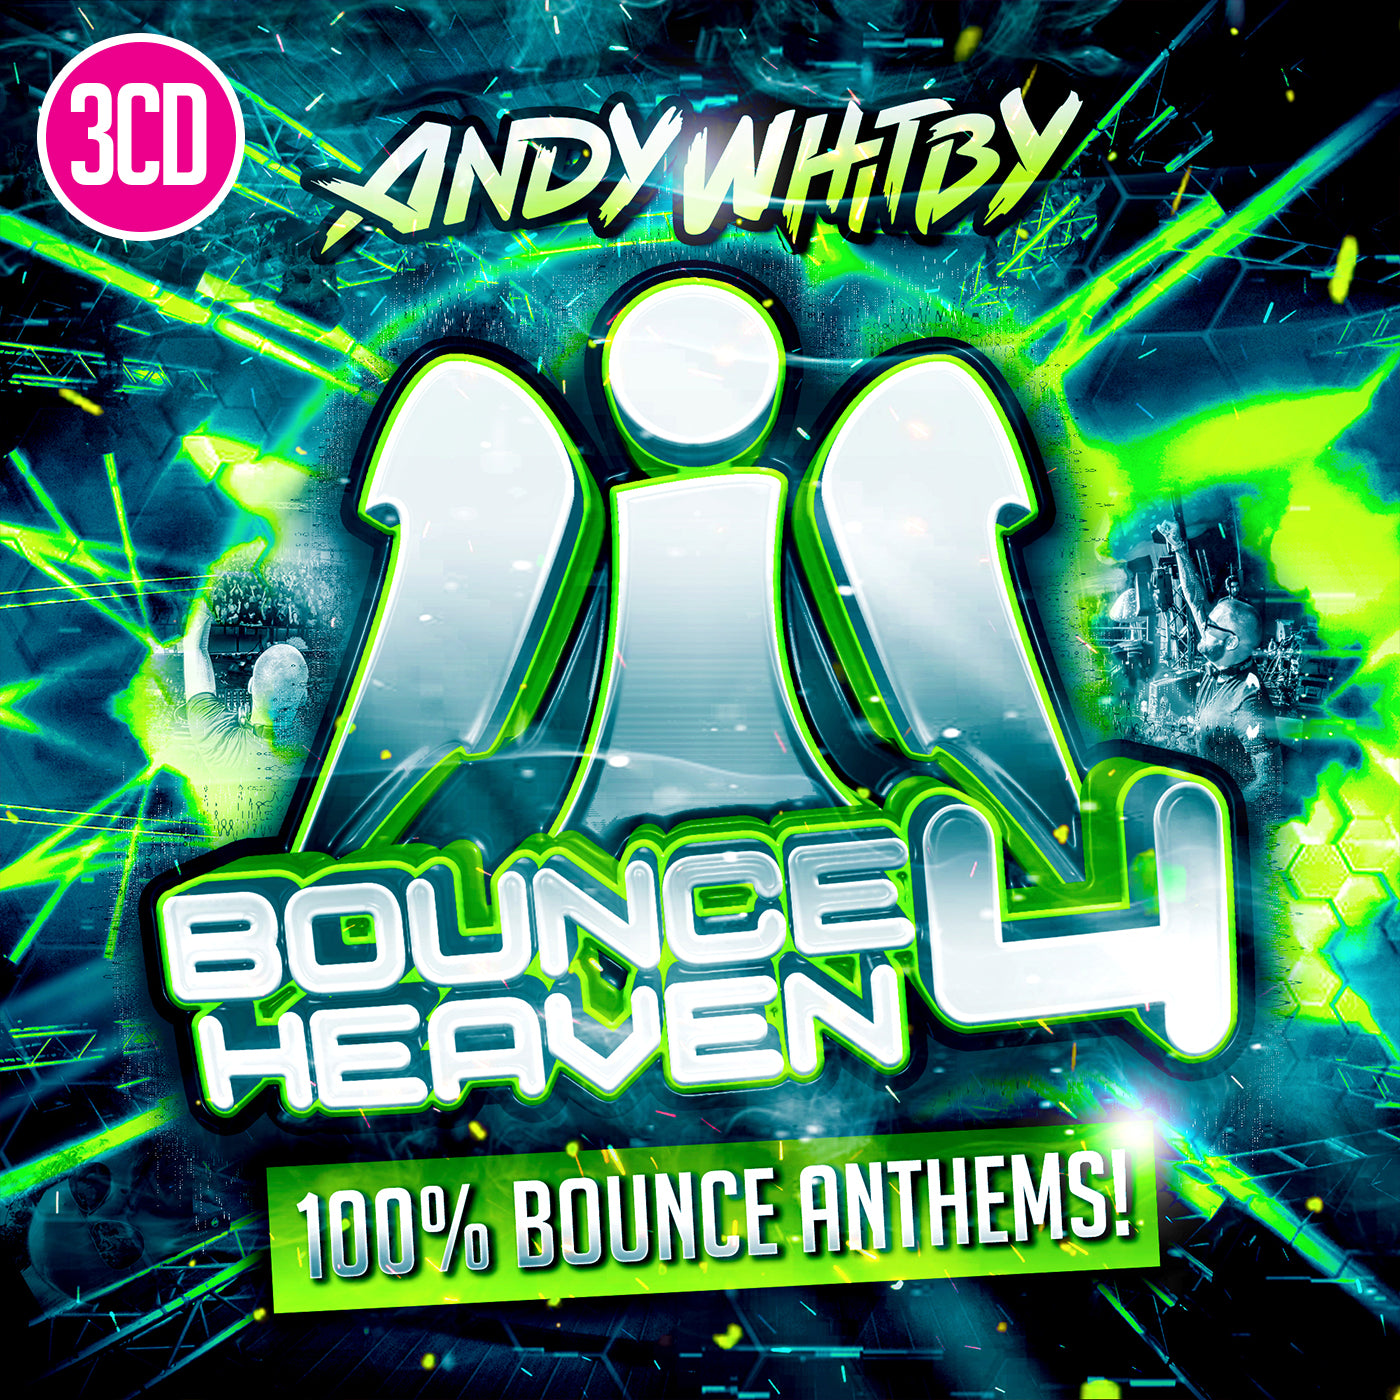 Bounce Heaven 4 mixed by Andy Whitby (3CD)